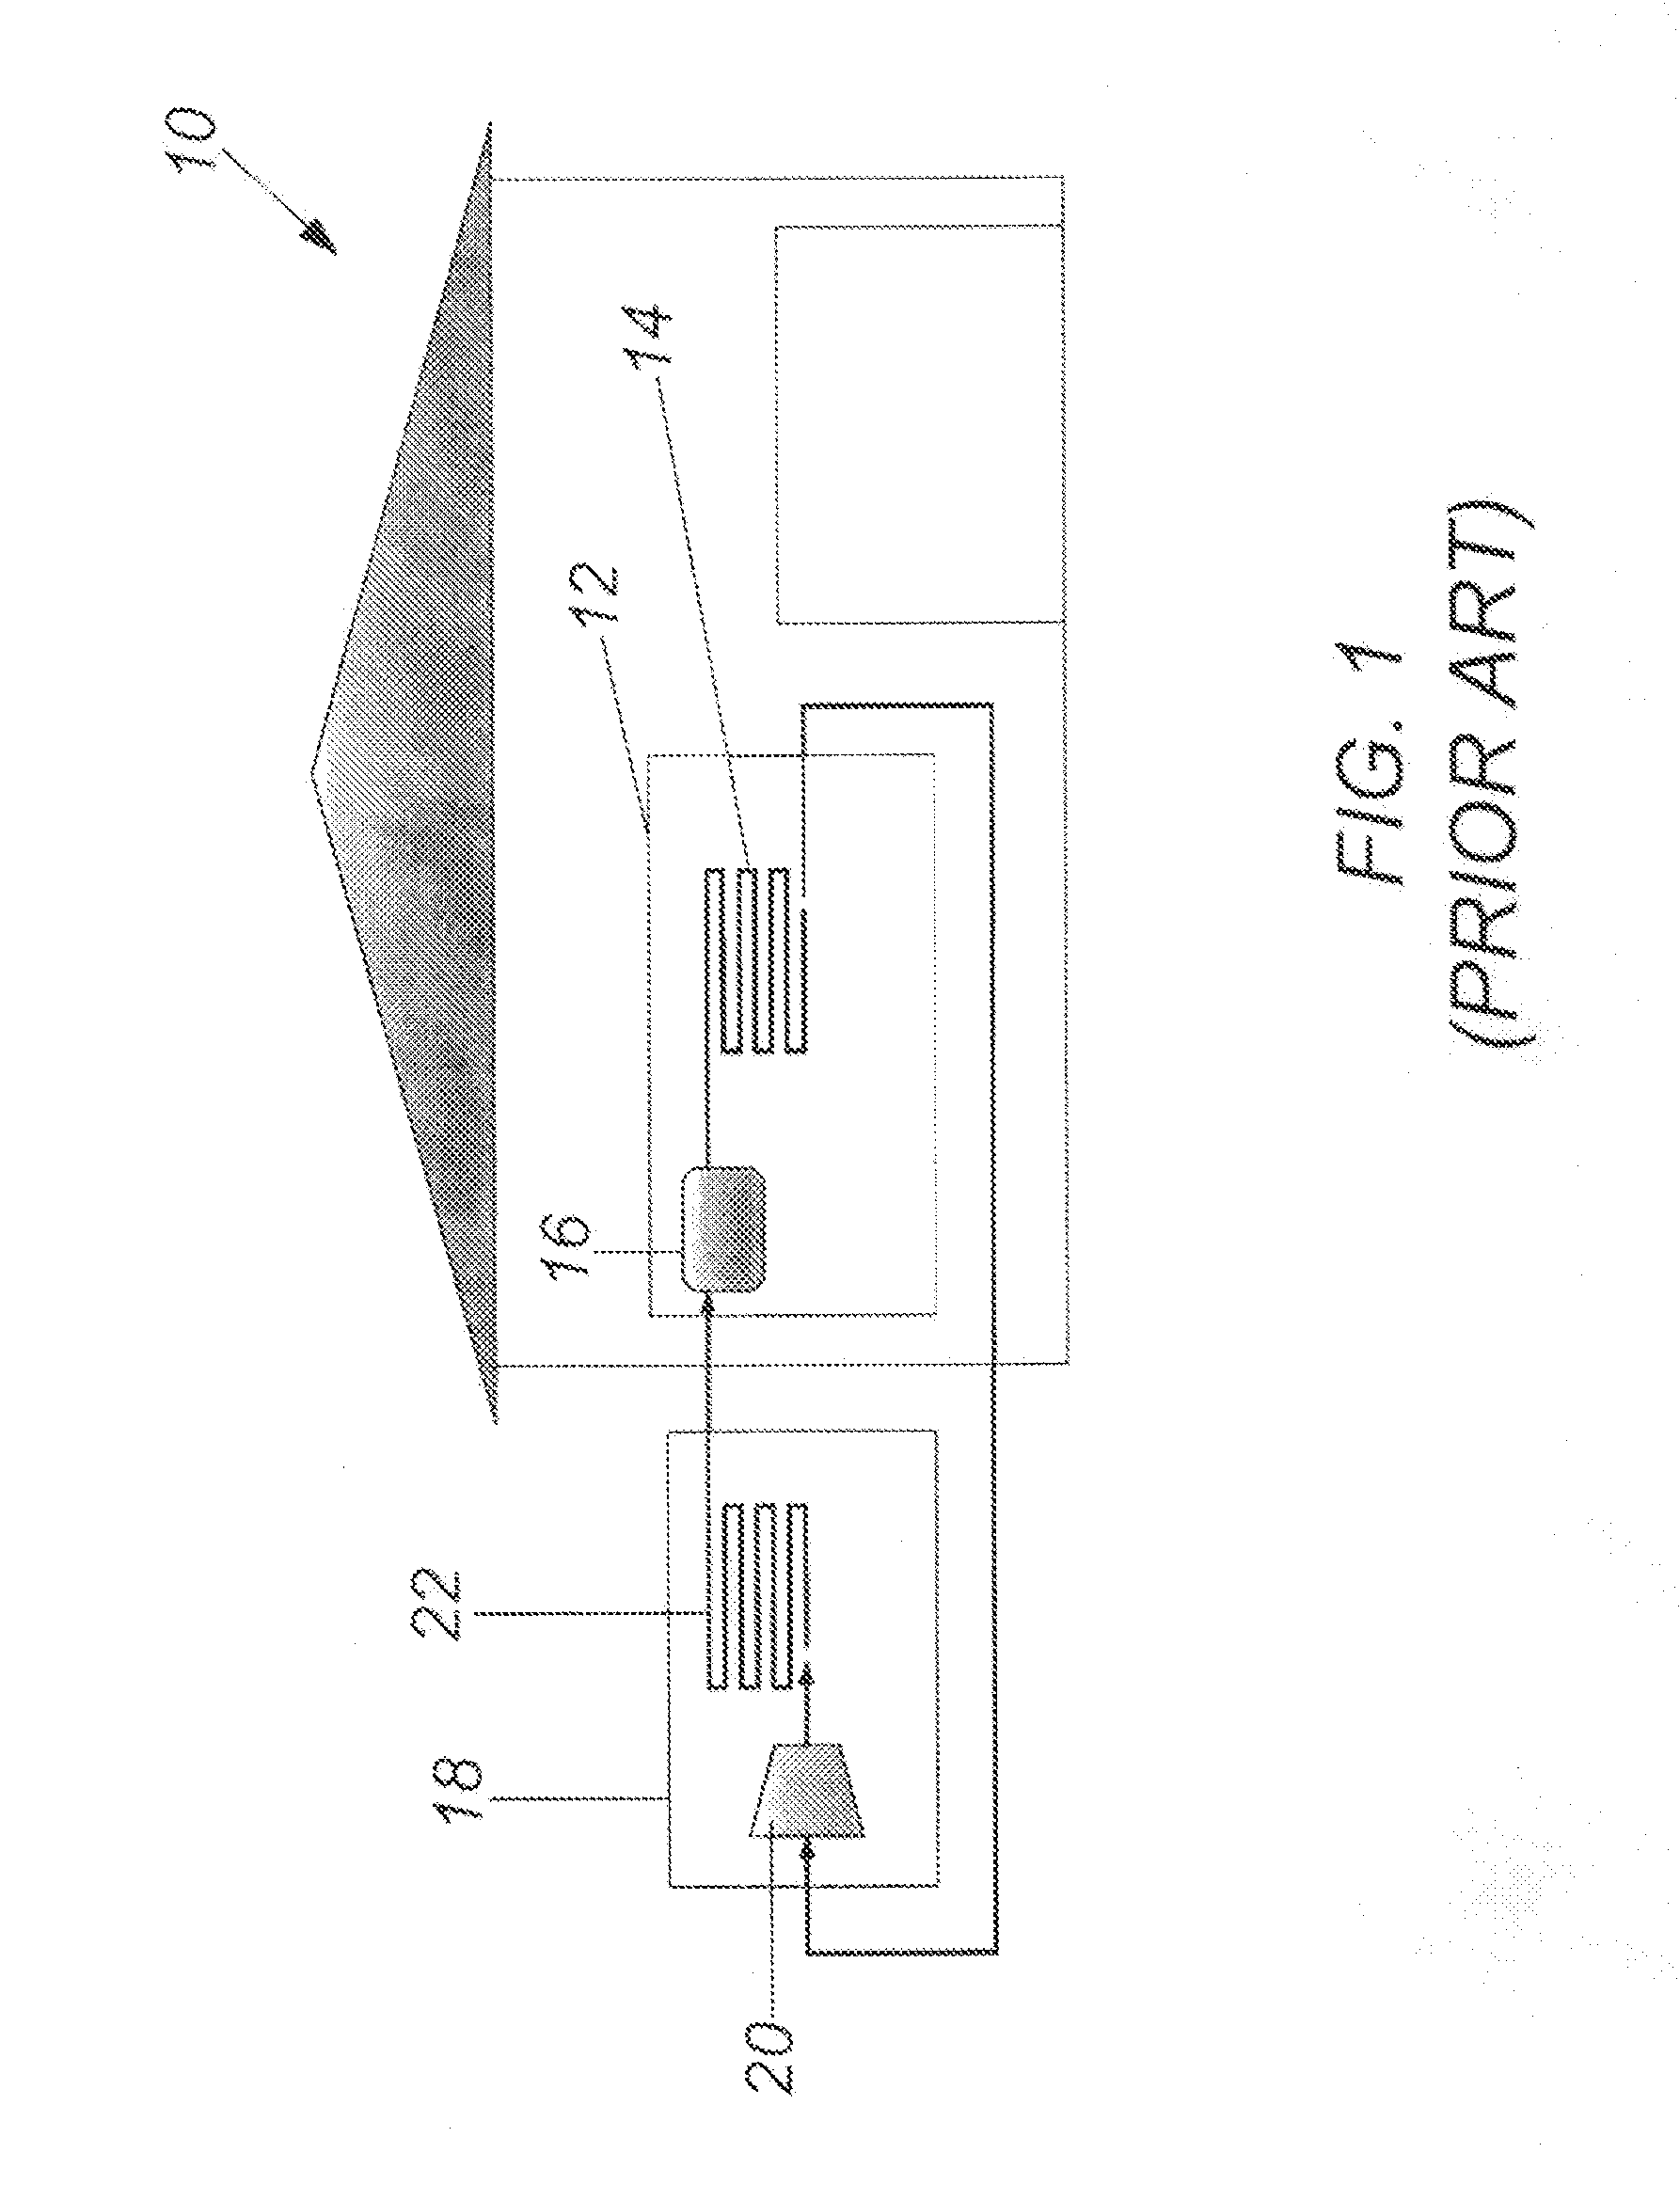 Solar turbo pump - hybrid heating-air conditioning and method of operation